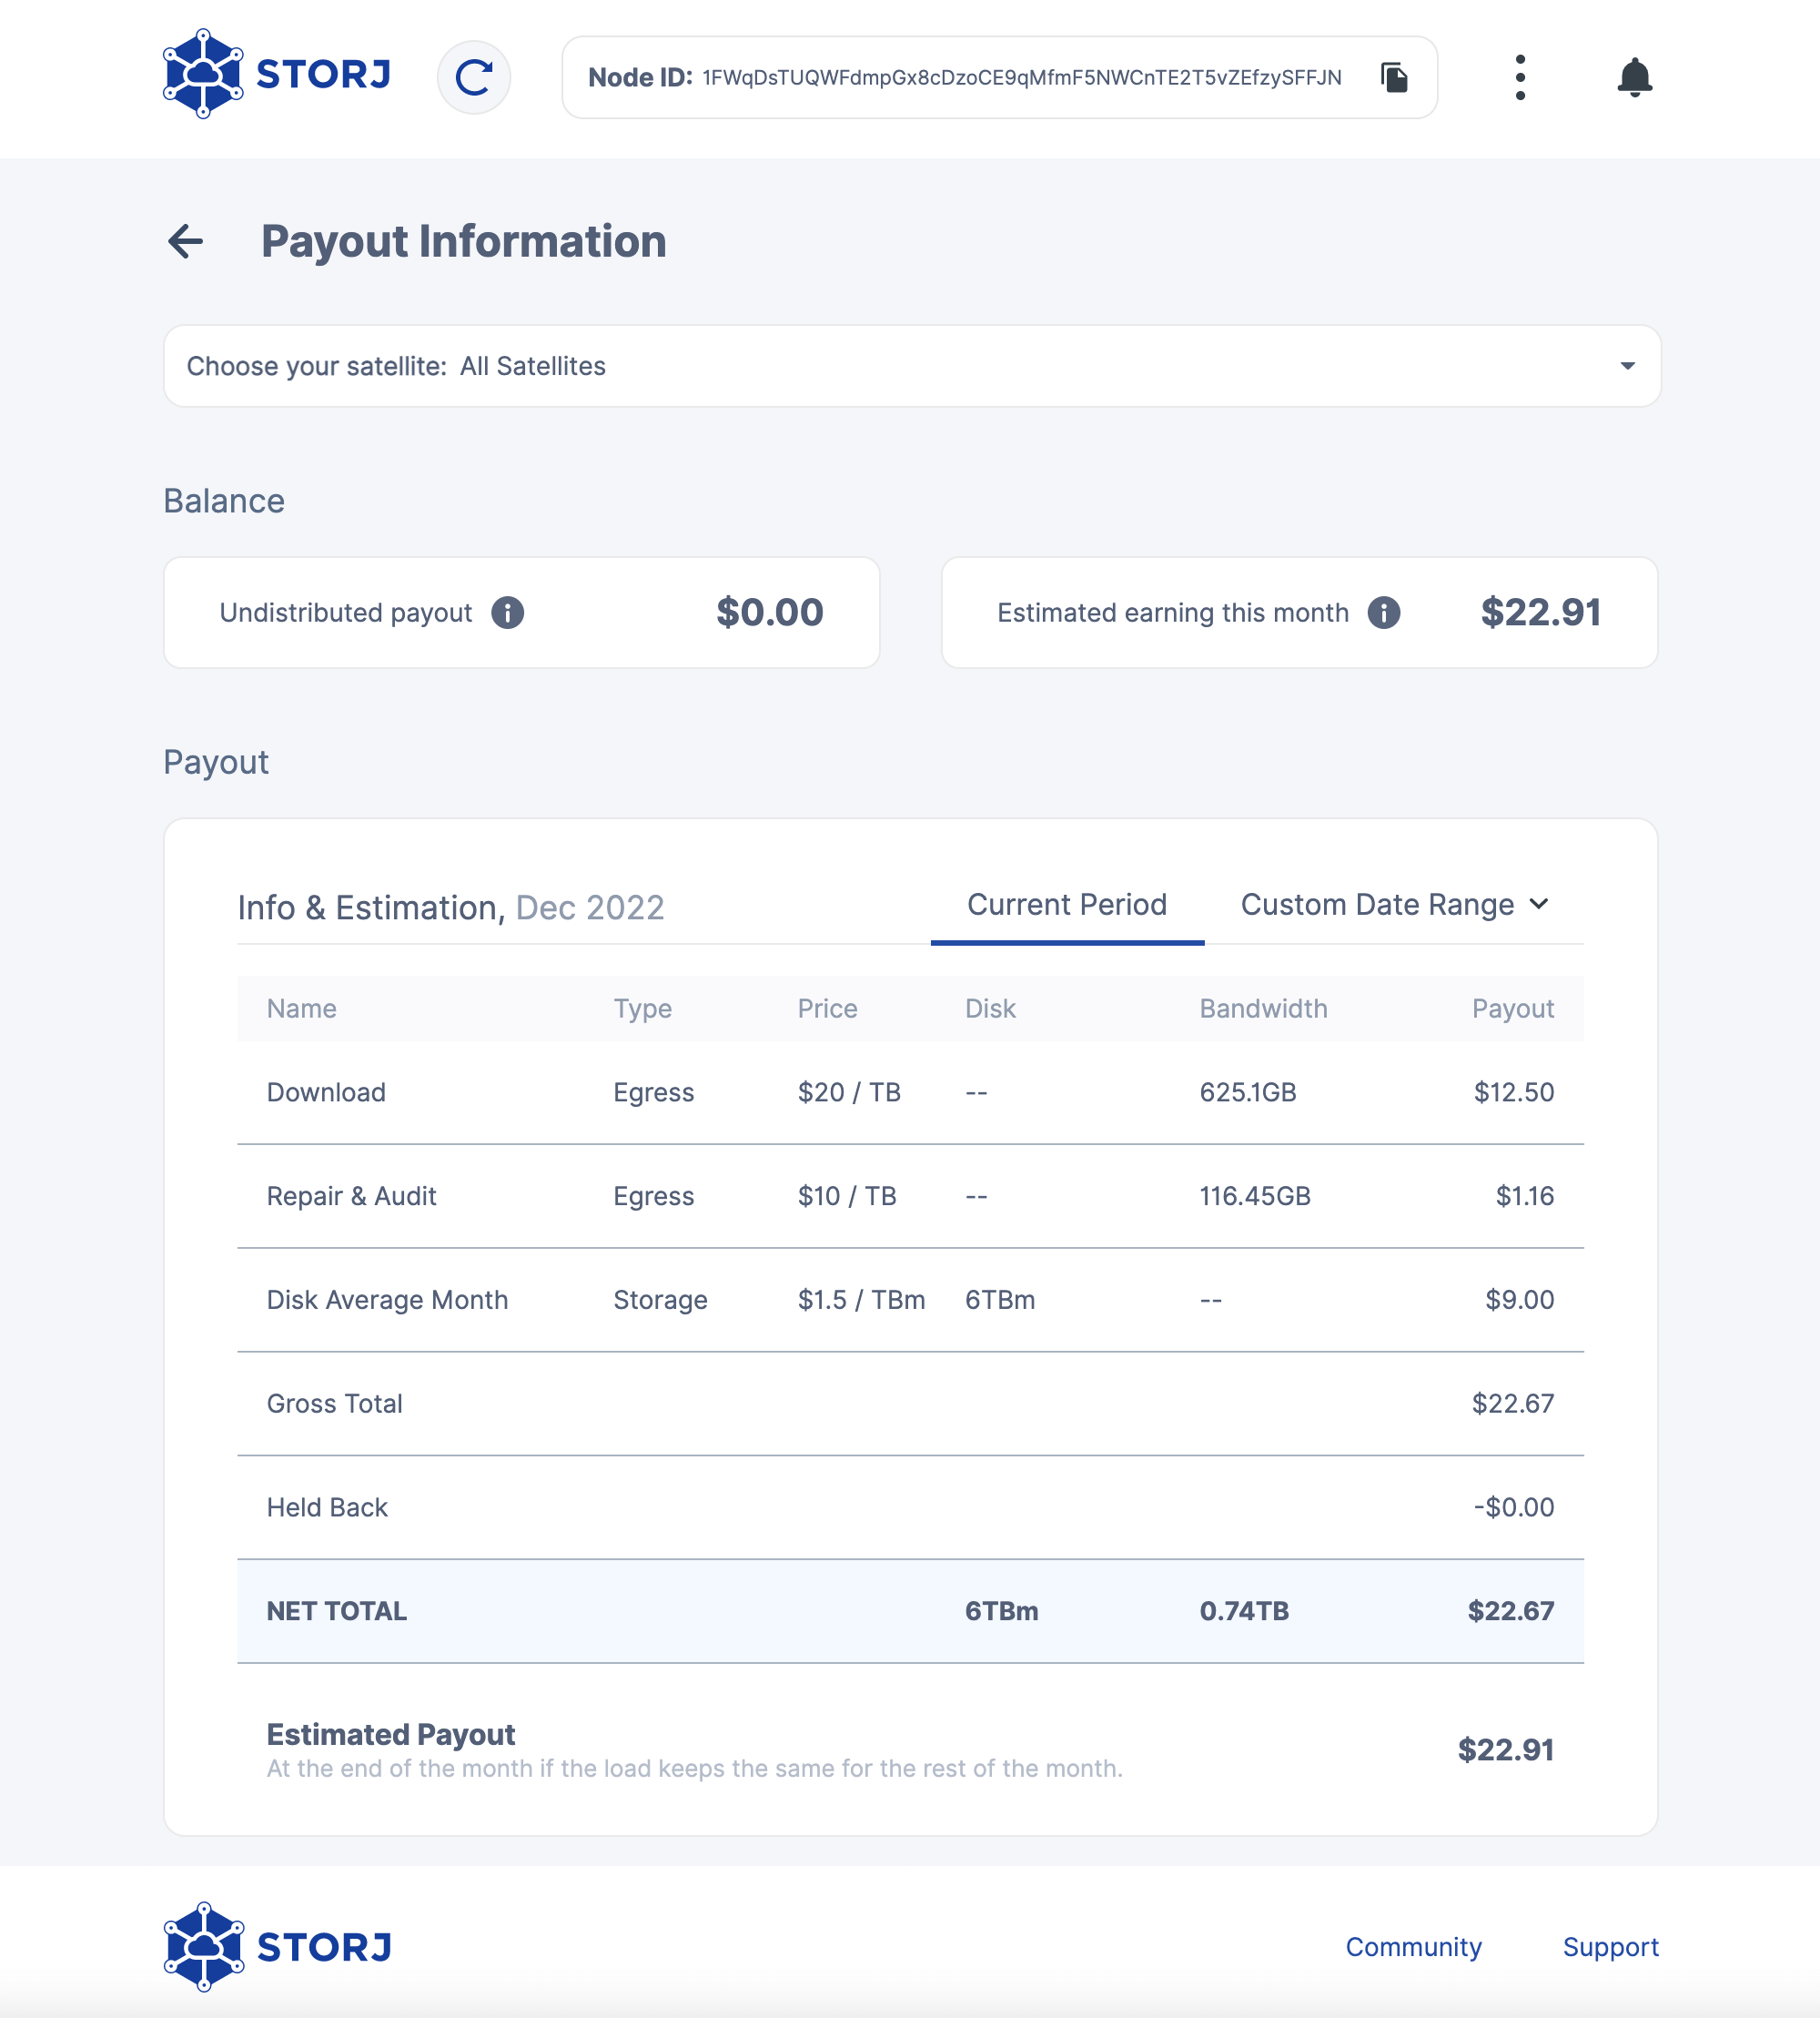 Storj Payout Information end of December 2022. Download Payout: $12.50, Repair & Audit Payout: $1.16, Disk Average Month Payout: $9, Net Total: $22.67, Estimated Payout: $22.91